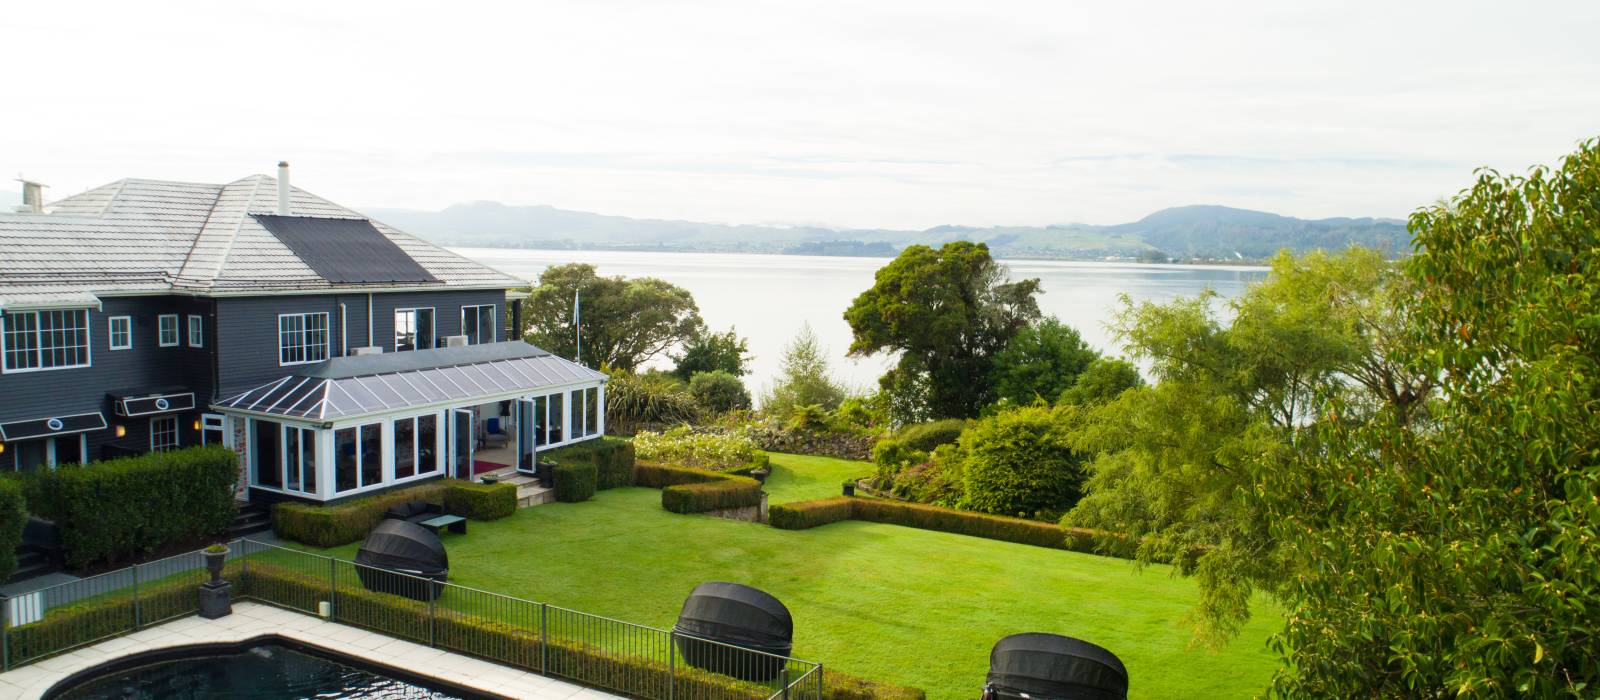 Black Swan Boutique Hotel in New Zealand | ENCHANTING TRAVELS